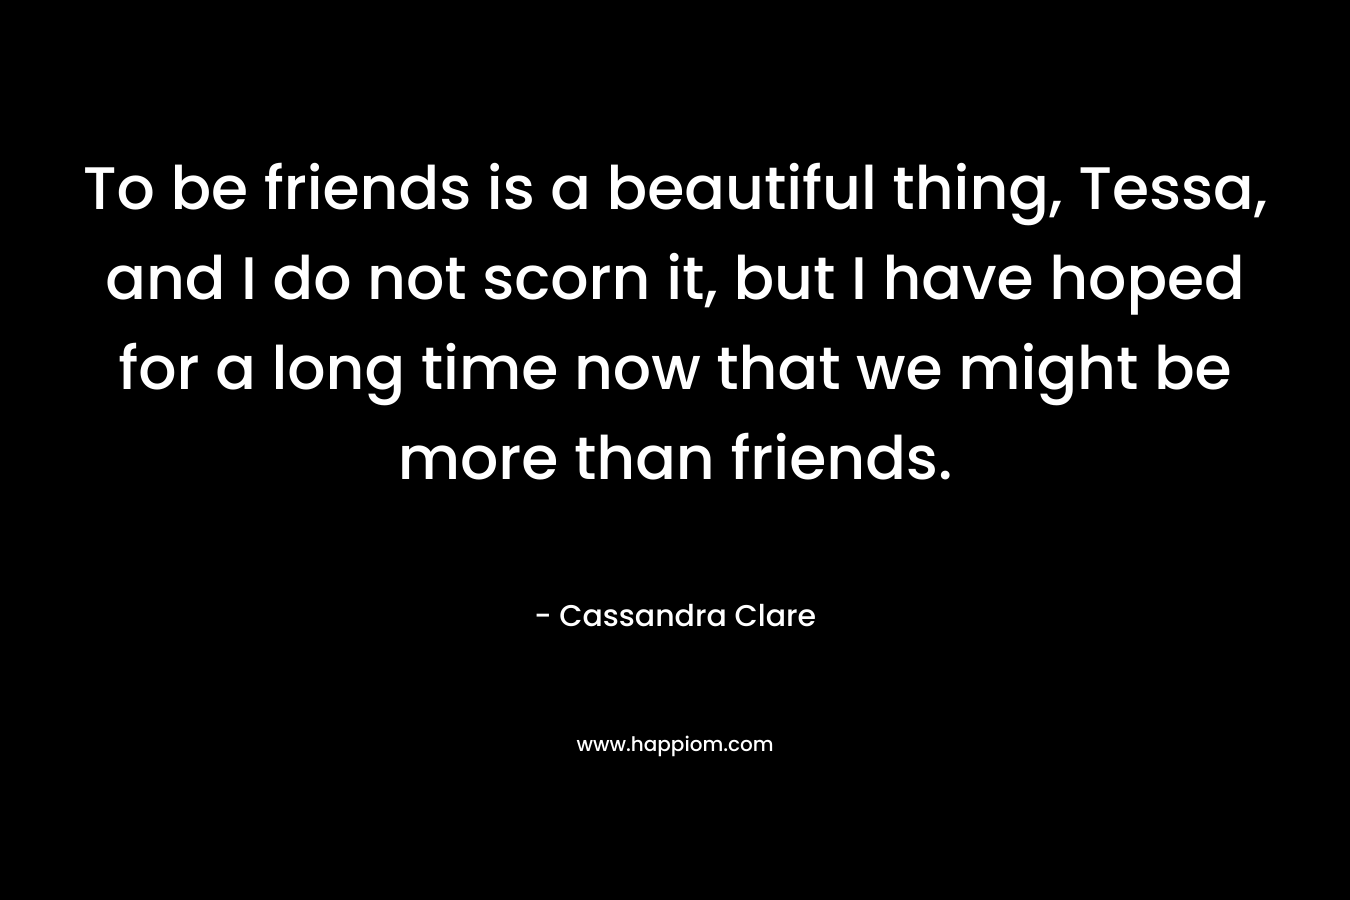 To be friends is a beautiful thing, Tessa, and I do not scorn it, but I have hoped for a long time now that we might be more than friends. – Cassandra Clare